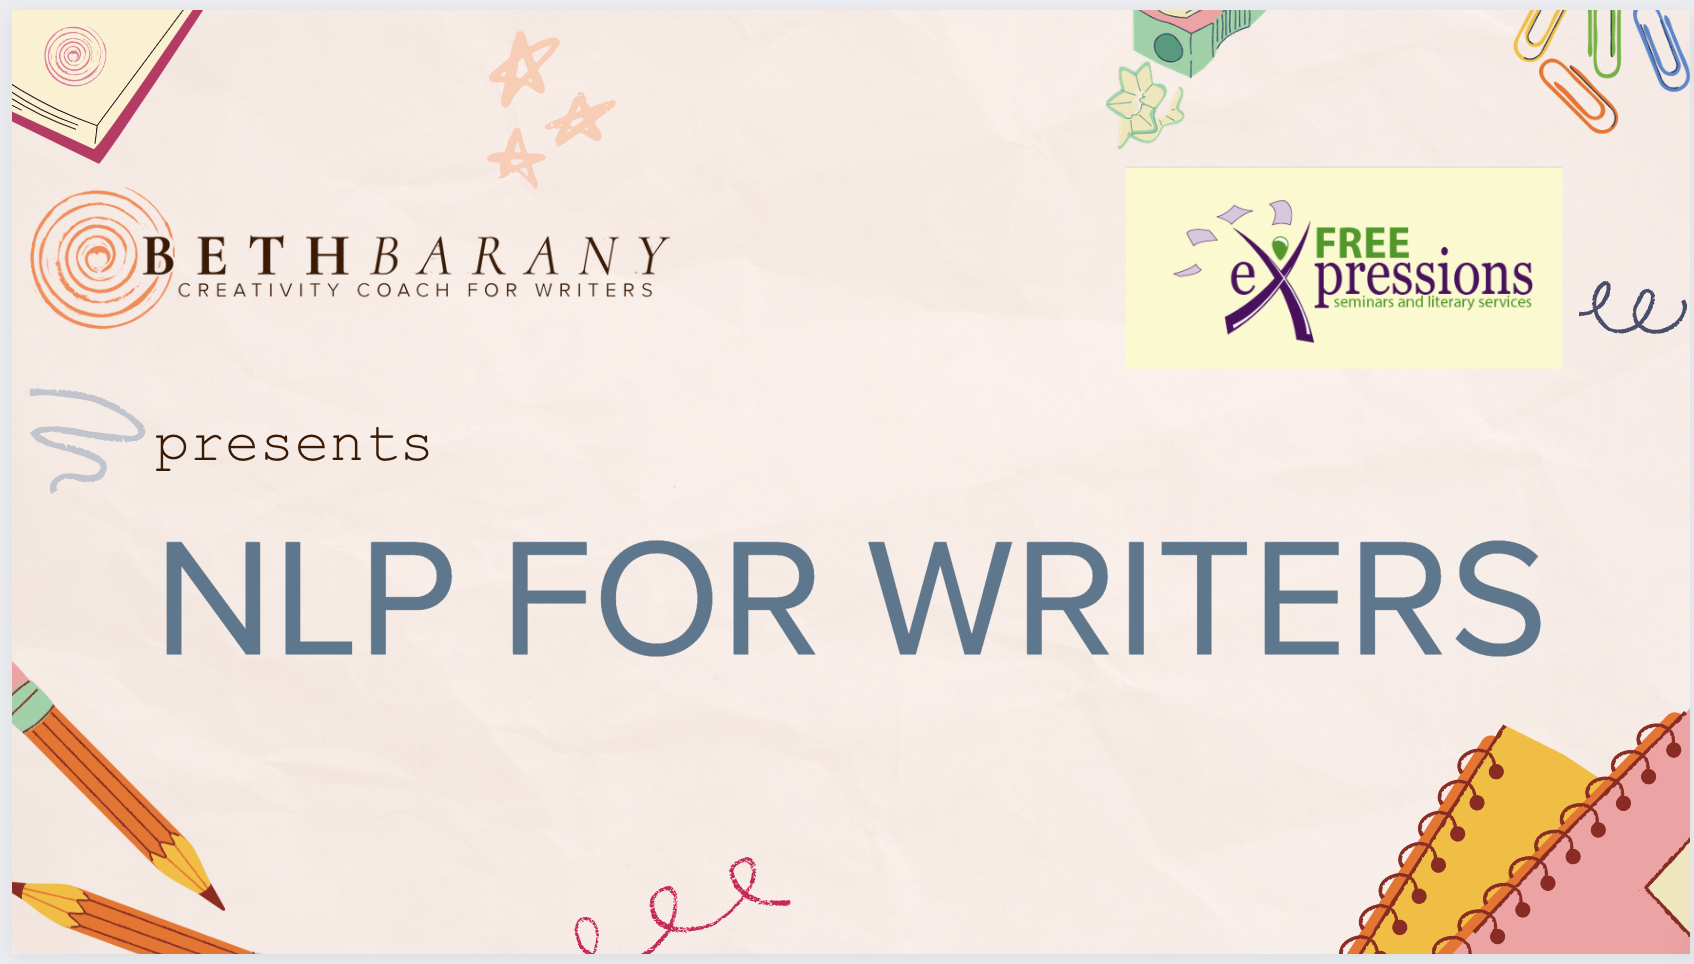 NLP FOR WRITERS with Beth Barany